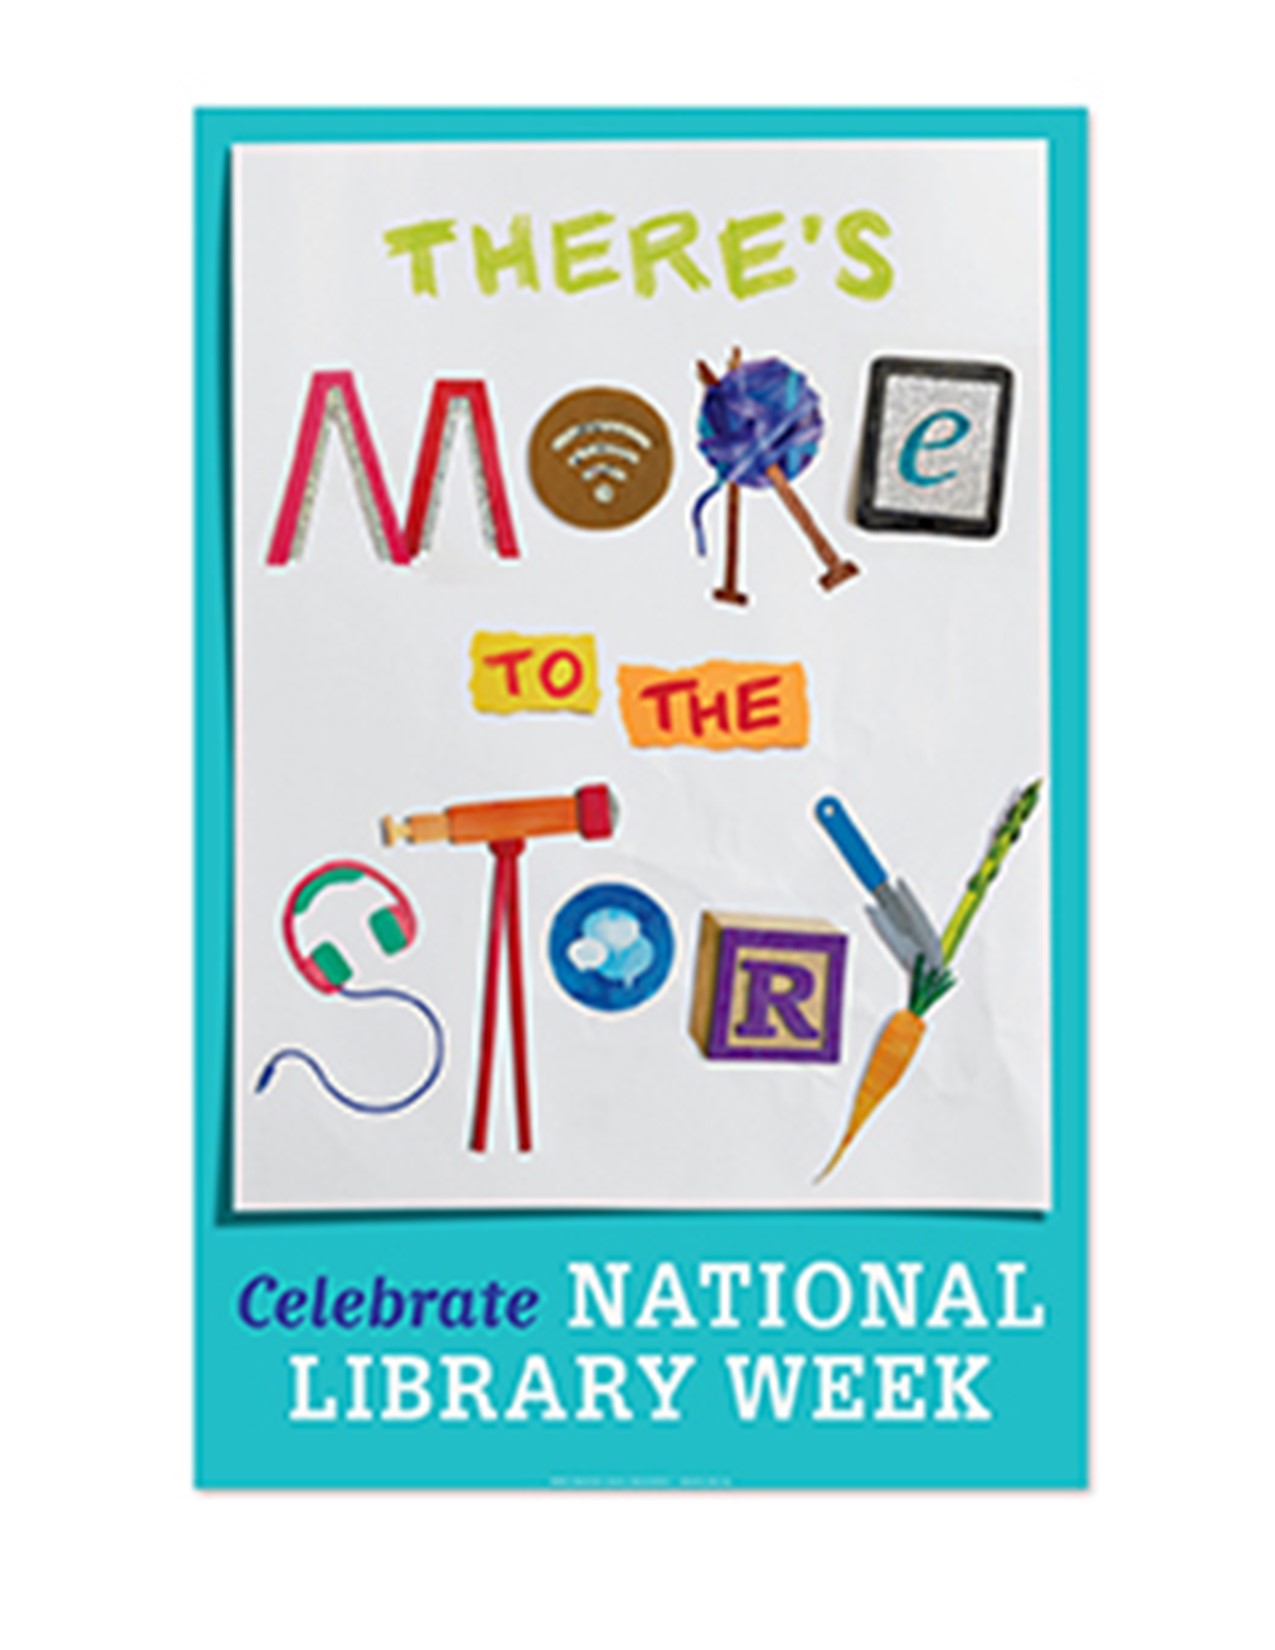 "There's More to the Story" written creatively with a blue border that says "Celebrate National Library Week".